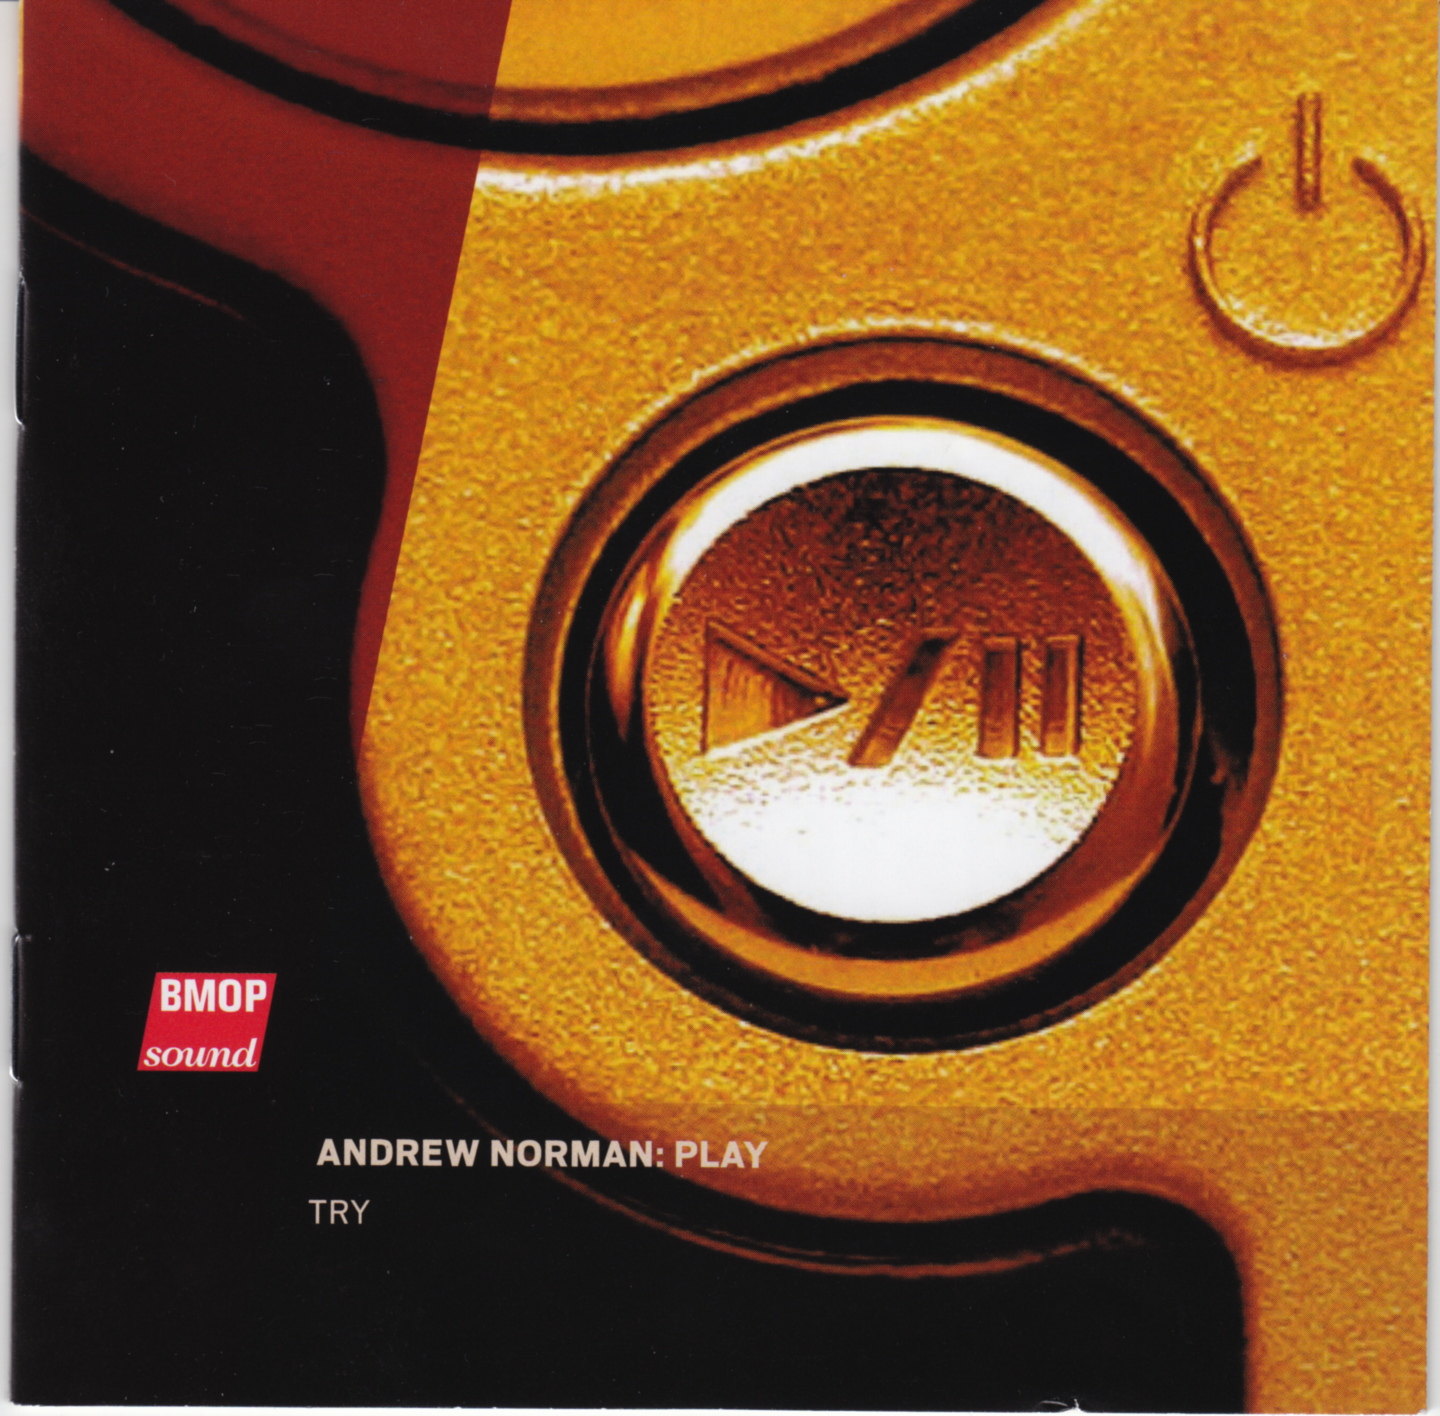 Andrew Norman: Play